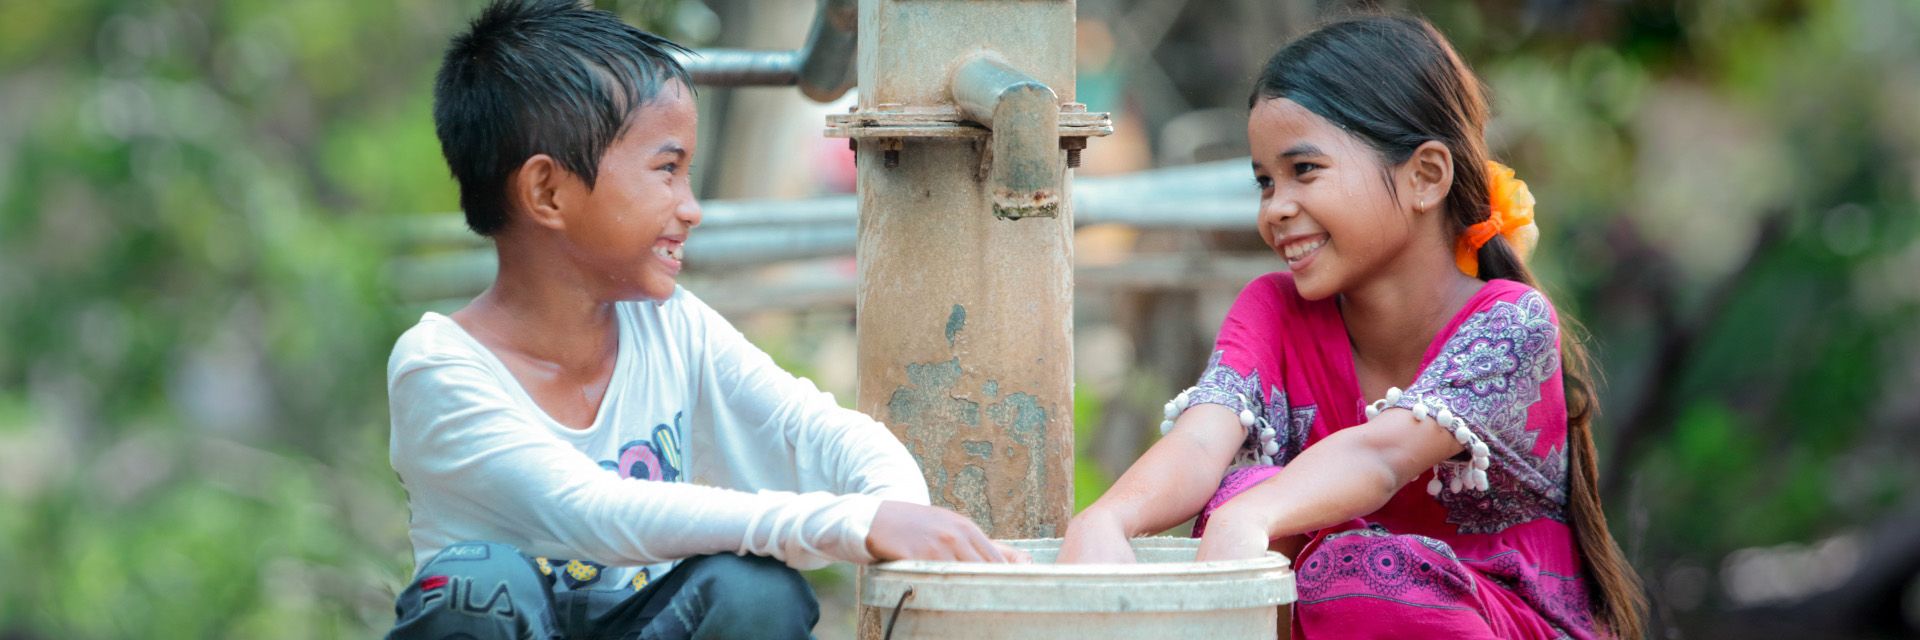 A young boy and girl smiling as they collect water from an outdoor faucet with a bucket. 